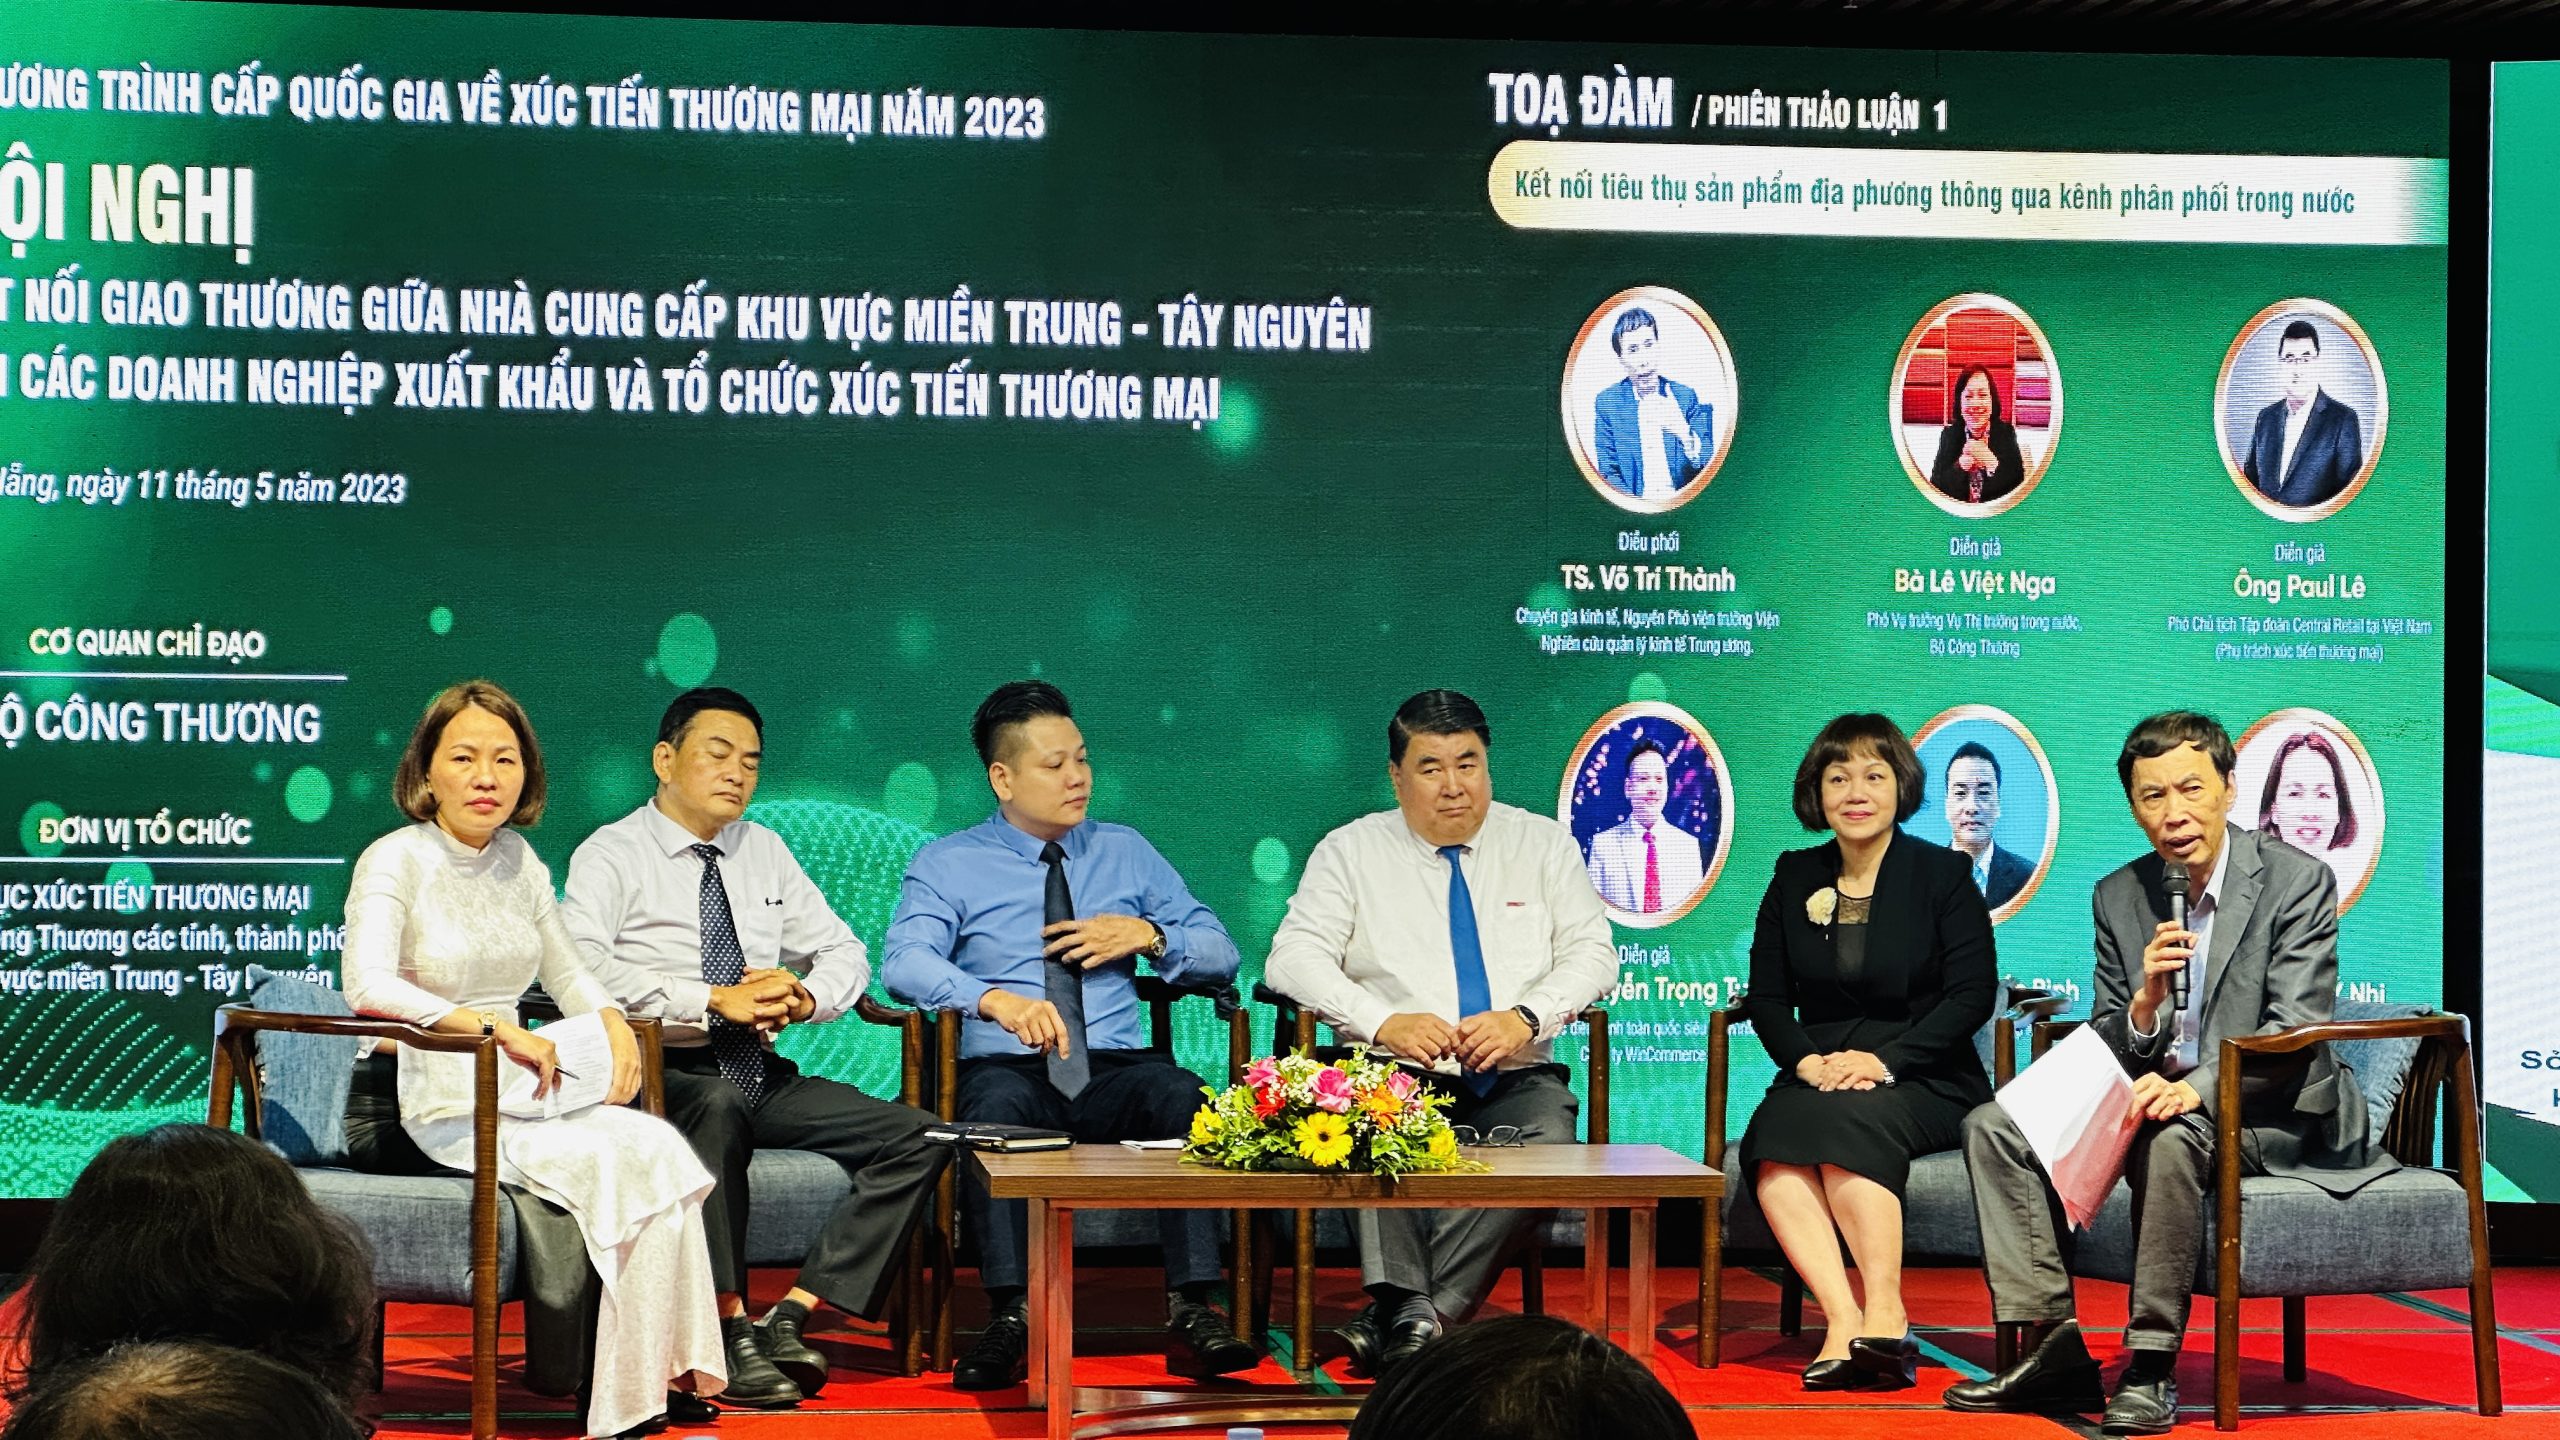 Central Retail in Vietnam attends ” Conference on connecting trade between suppliers in the Central region – Central Highlands and export business and trade promotion organizations